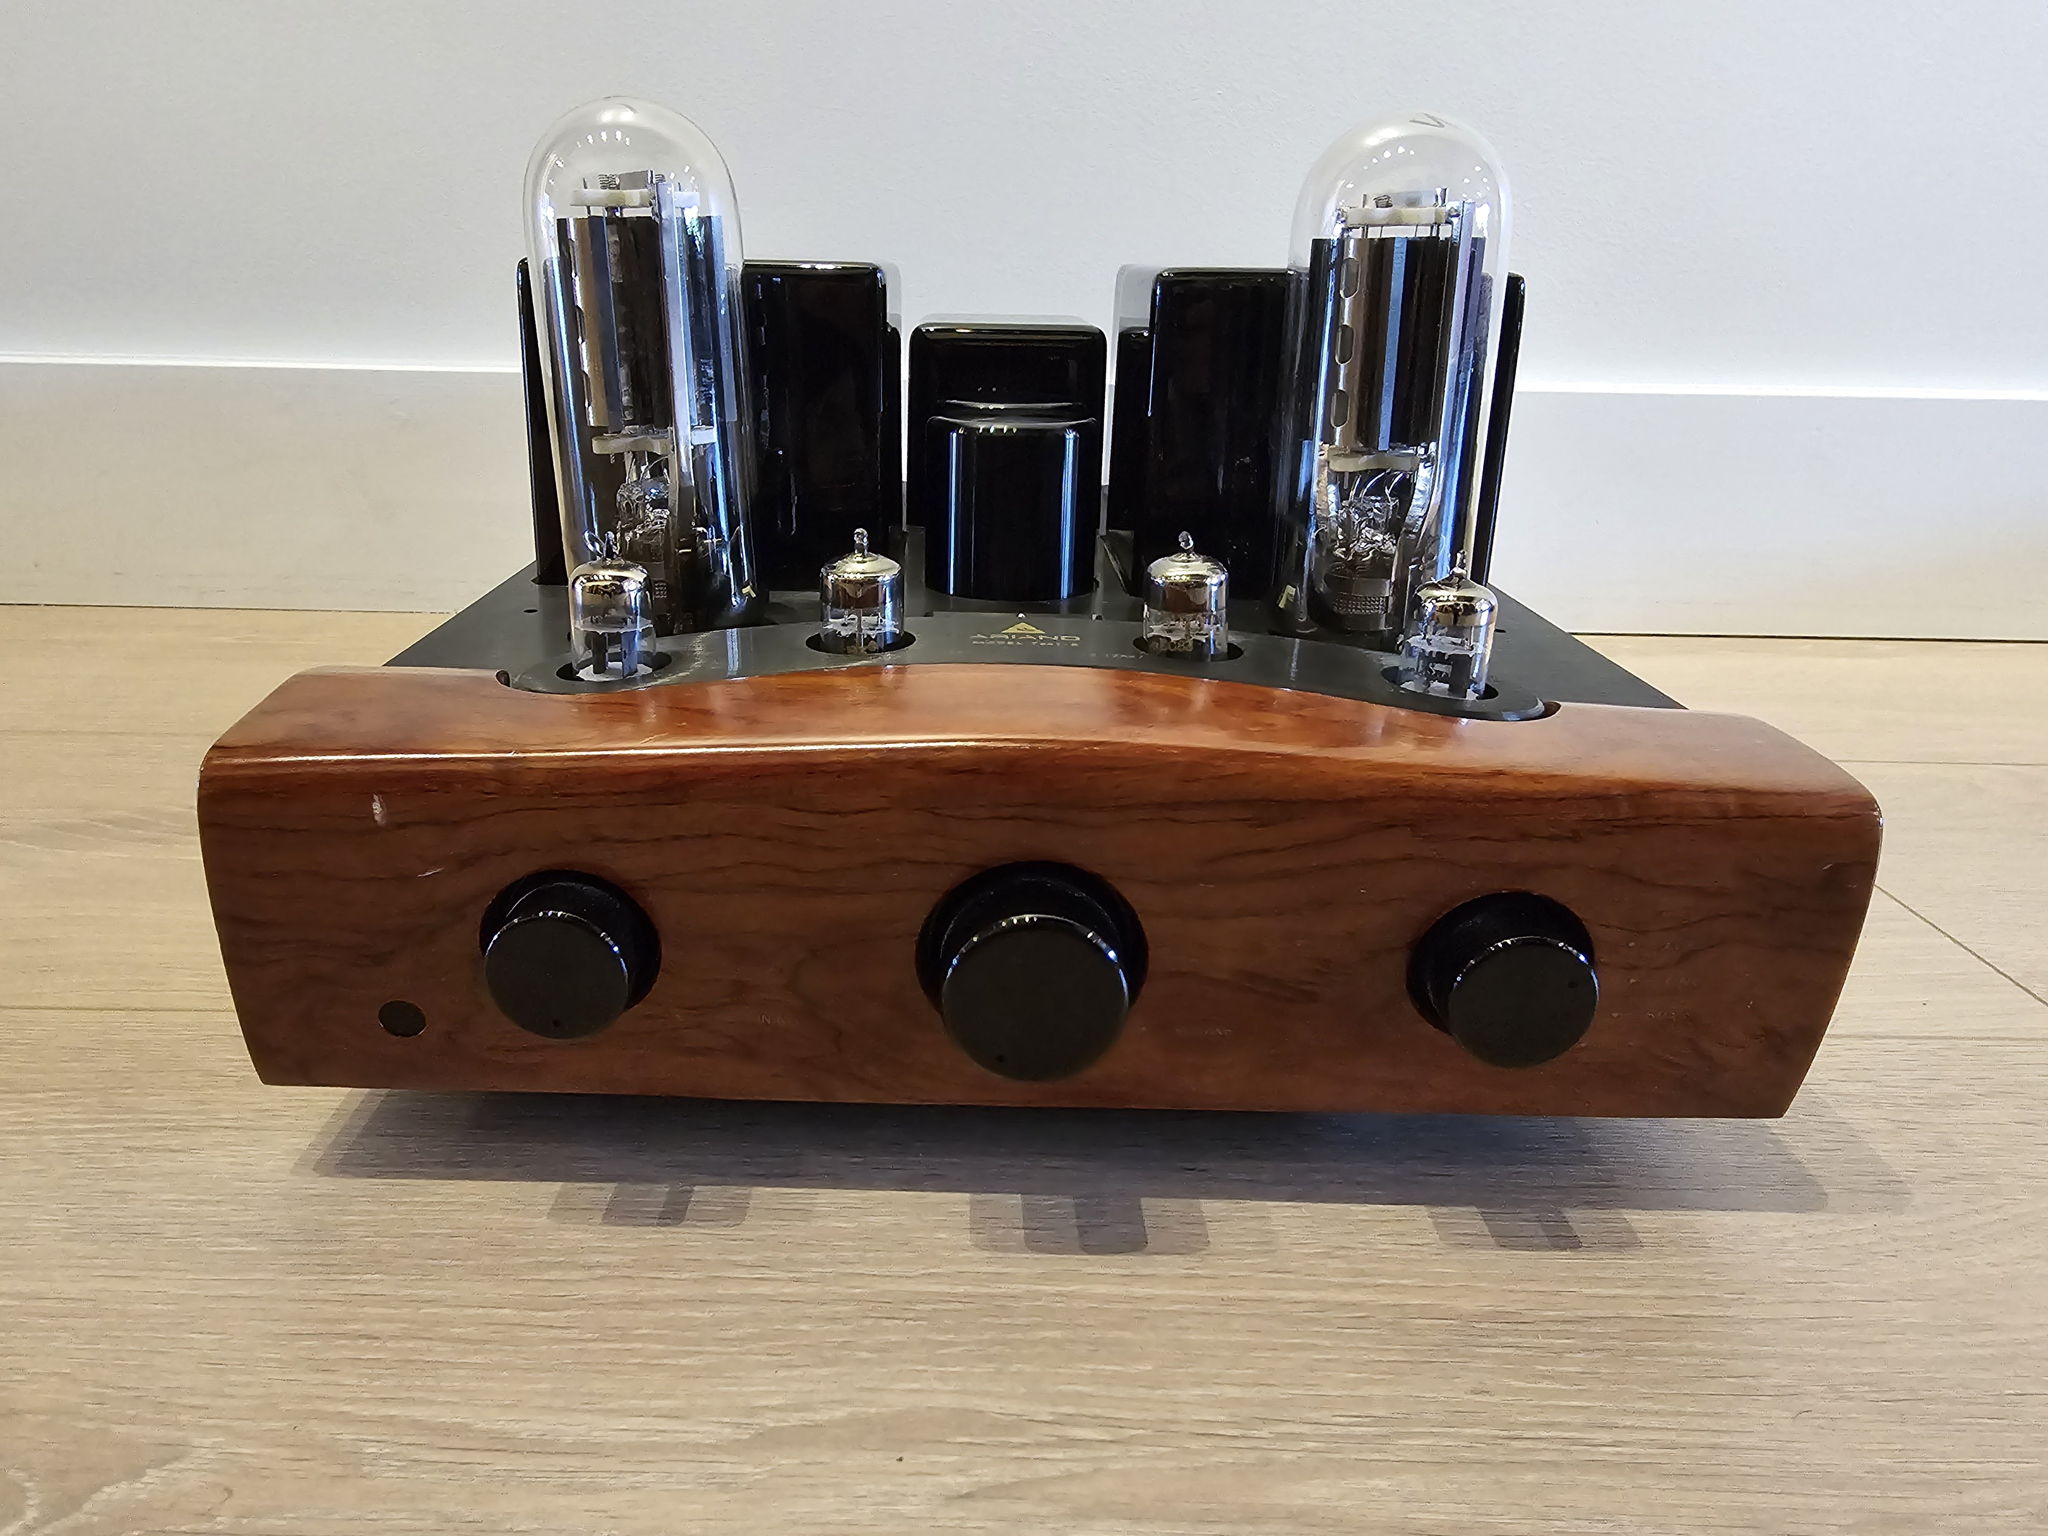 Yarland/Ariand T845S Integrated 845 Tube Amplifier Work...